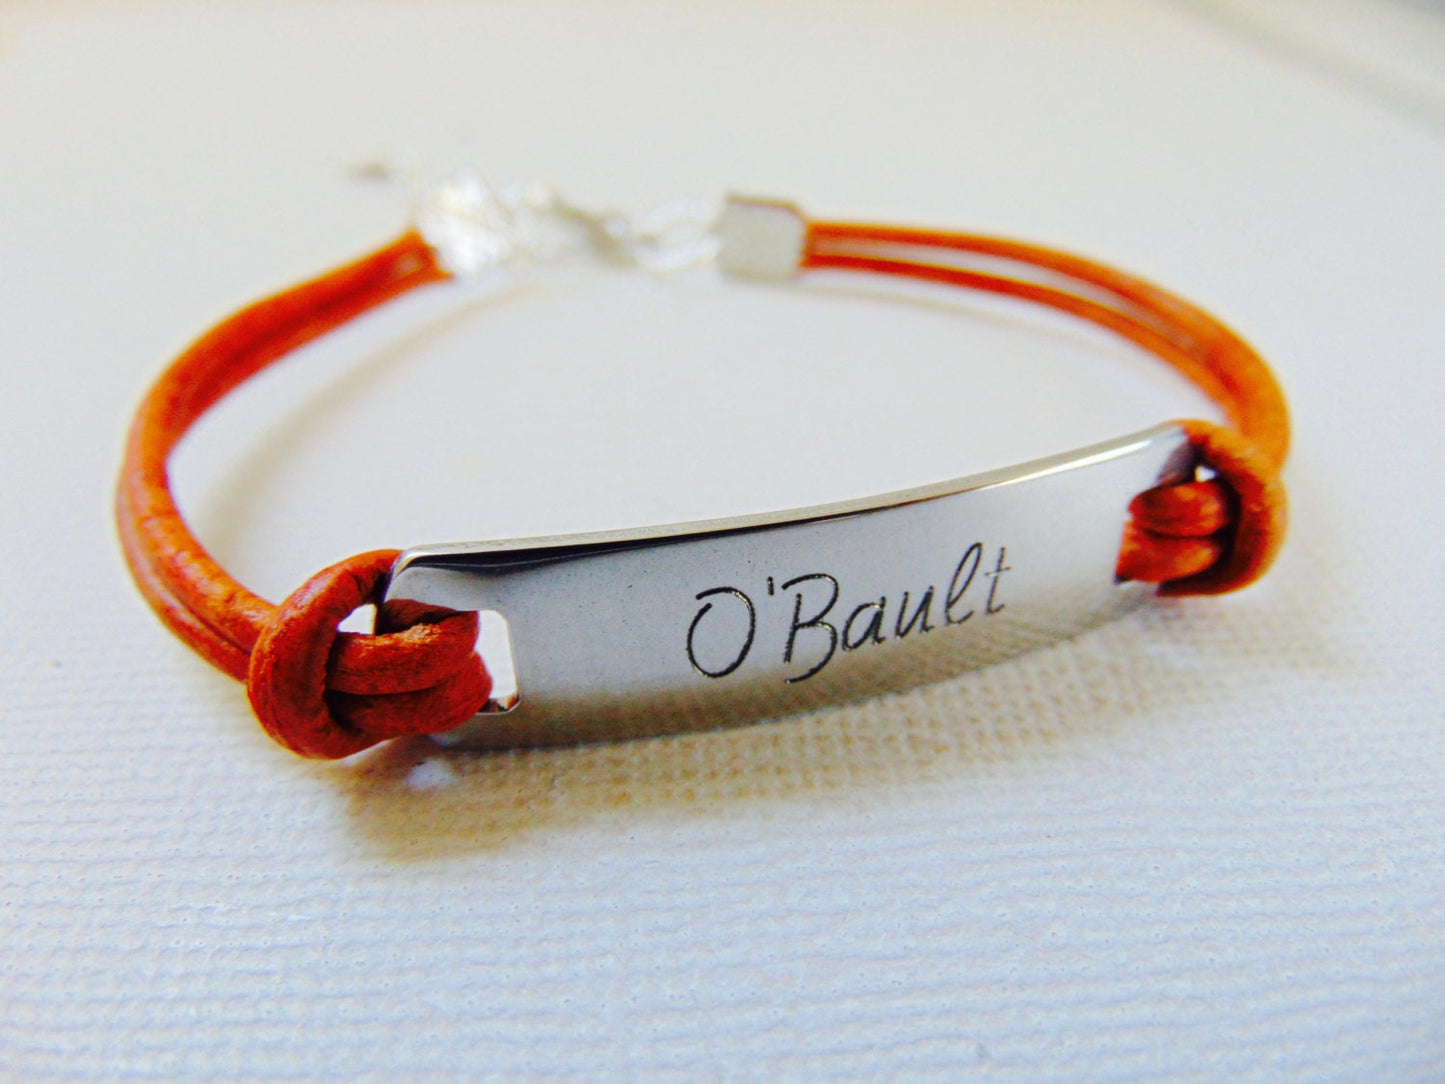 Personalized Engraved message on a bar bracelet and brown/black leather